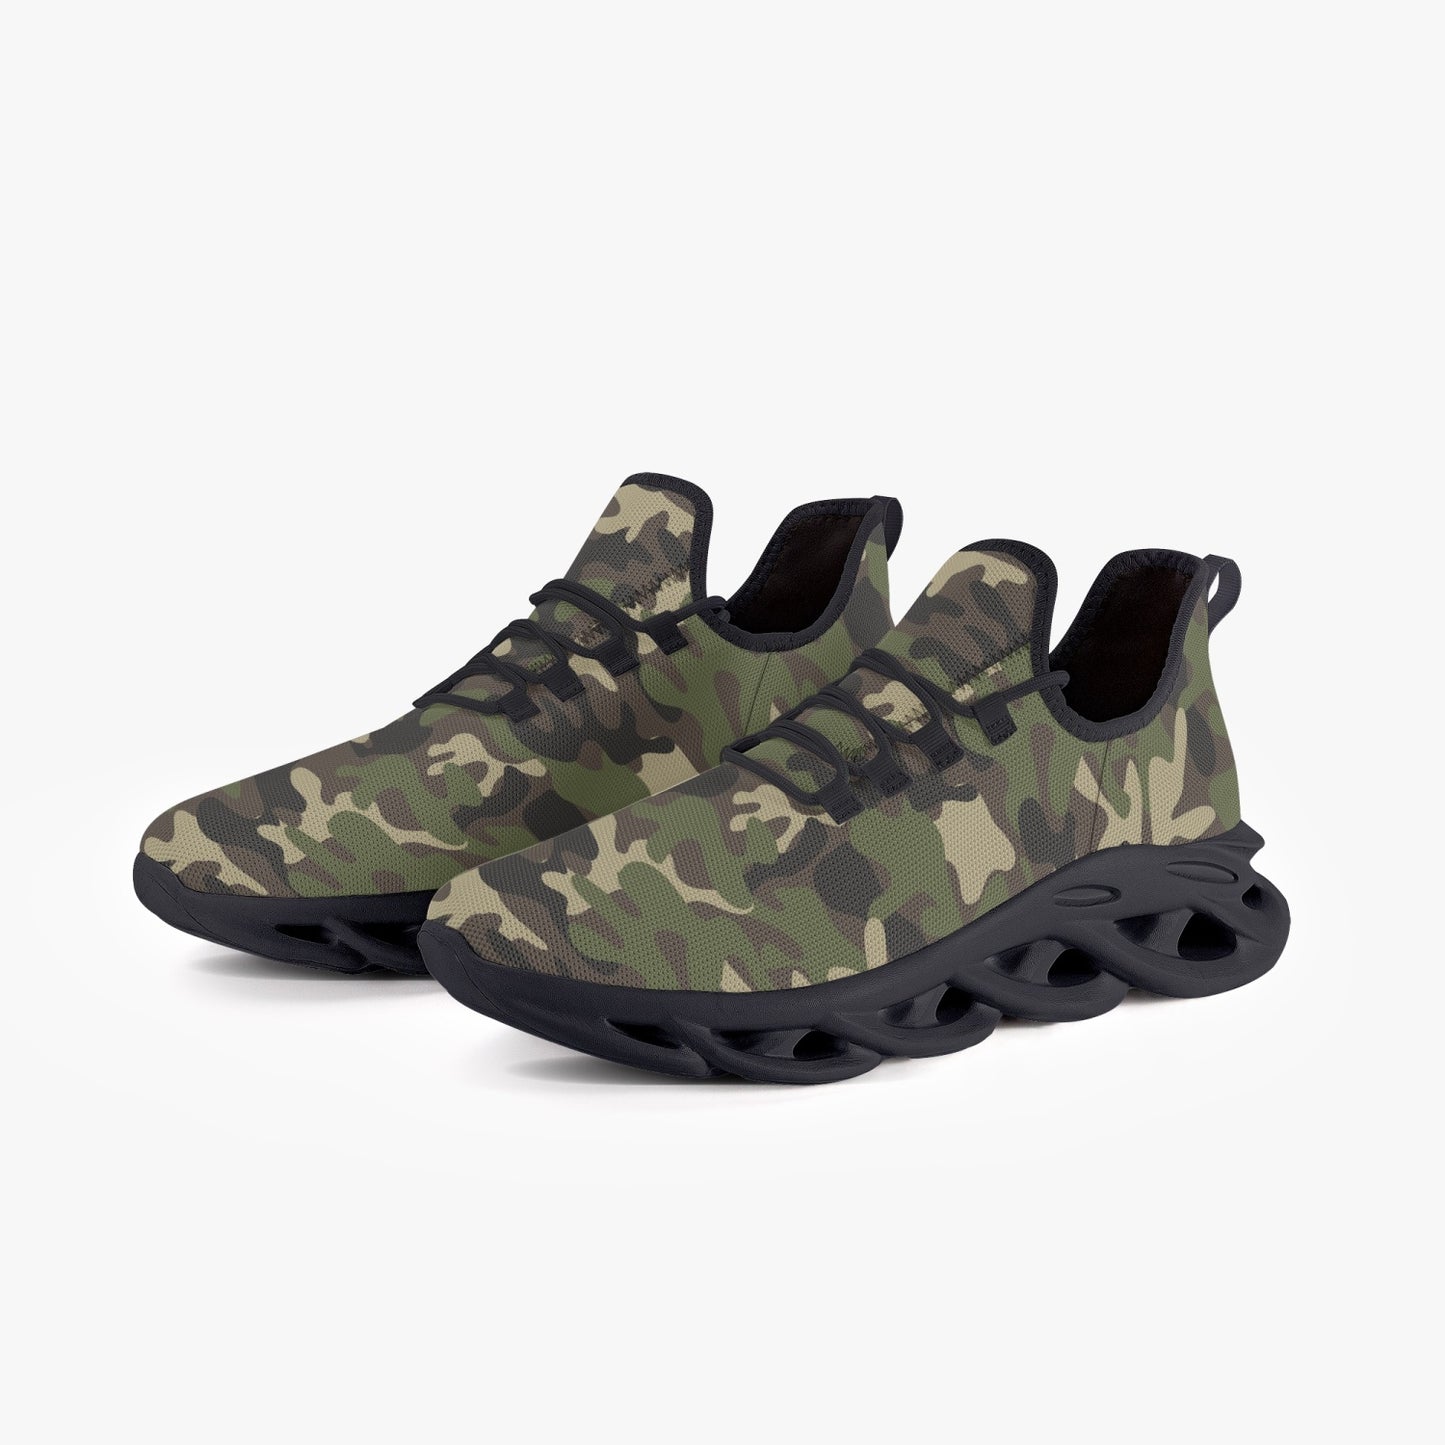 Camo Sneakers, Green Army Camouflage Bouncing Mesh Men Women Knit Running Athletic Sport Workout Breathable Lace Up Fitness Shoes Trainers